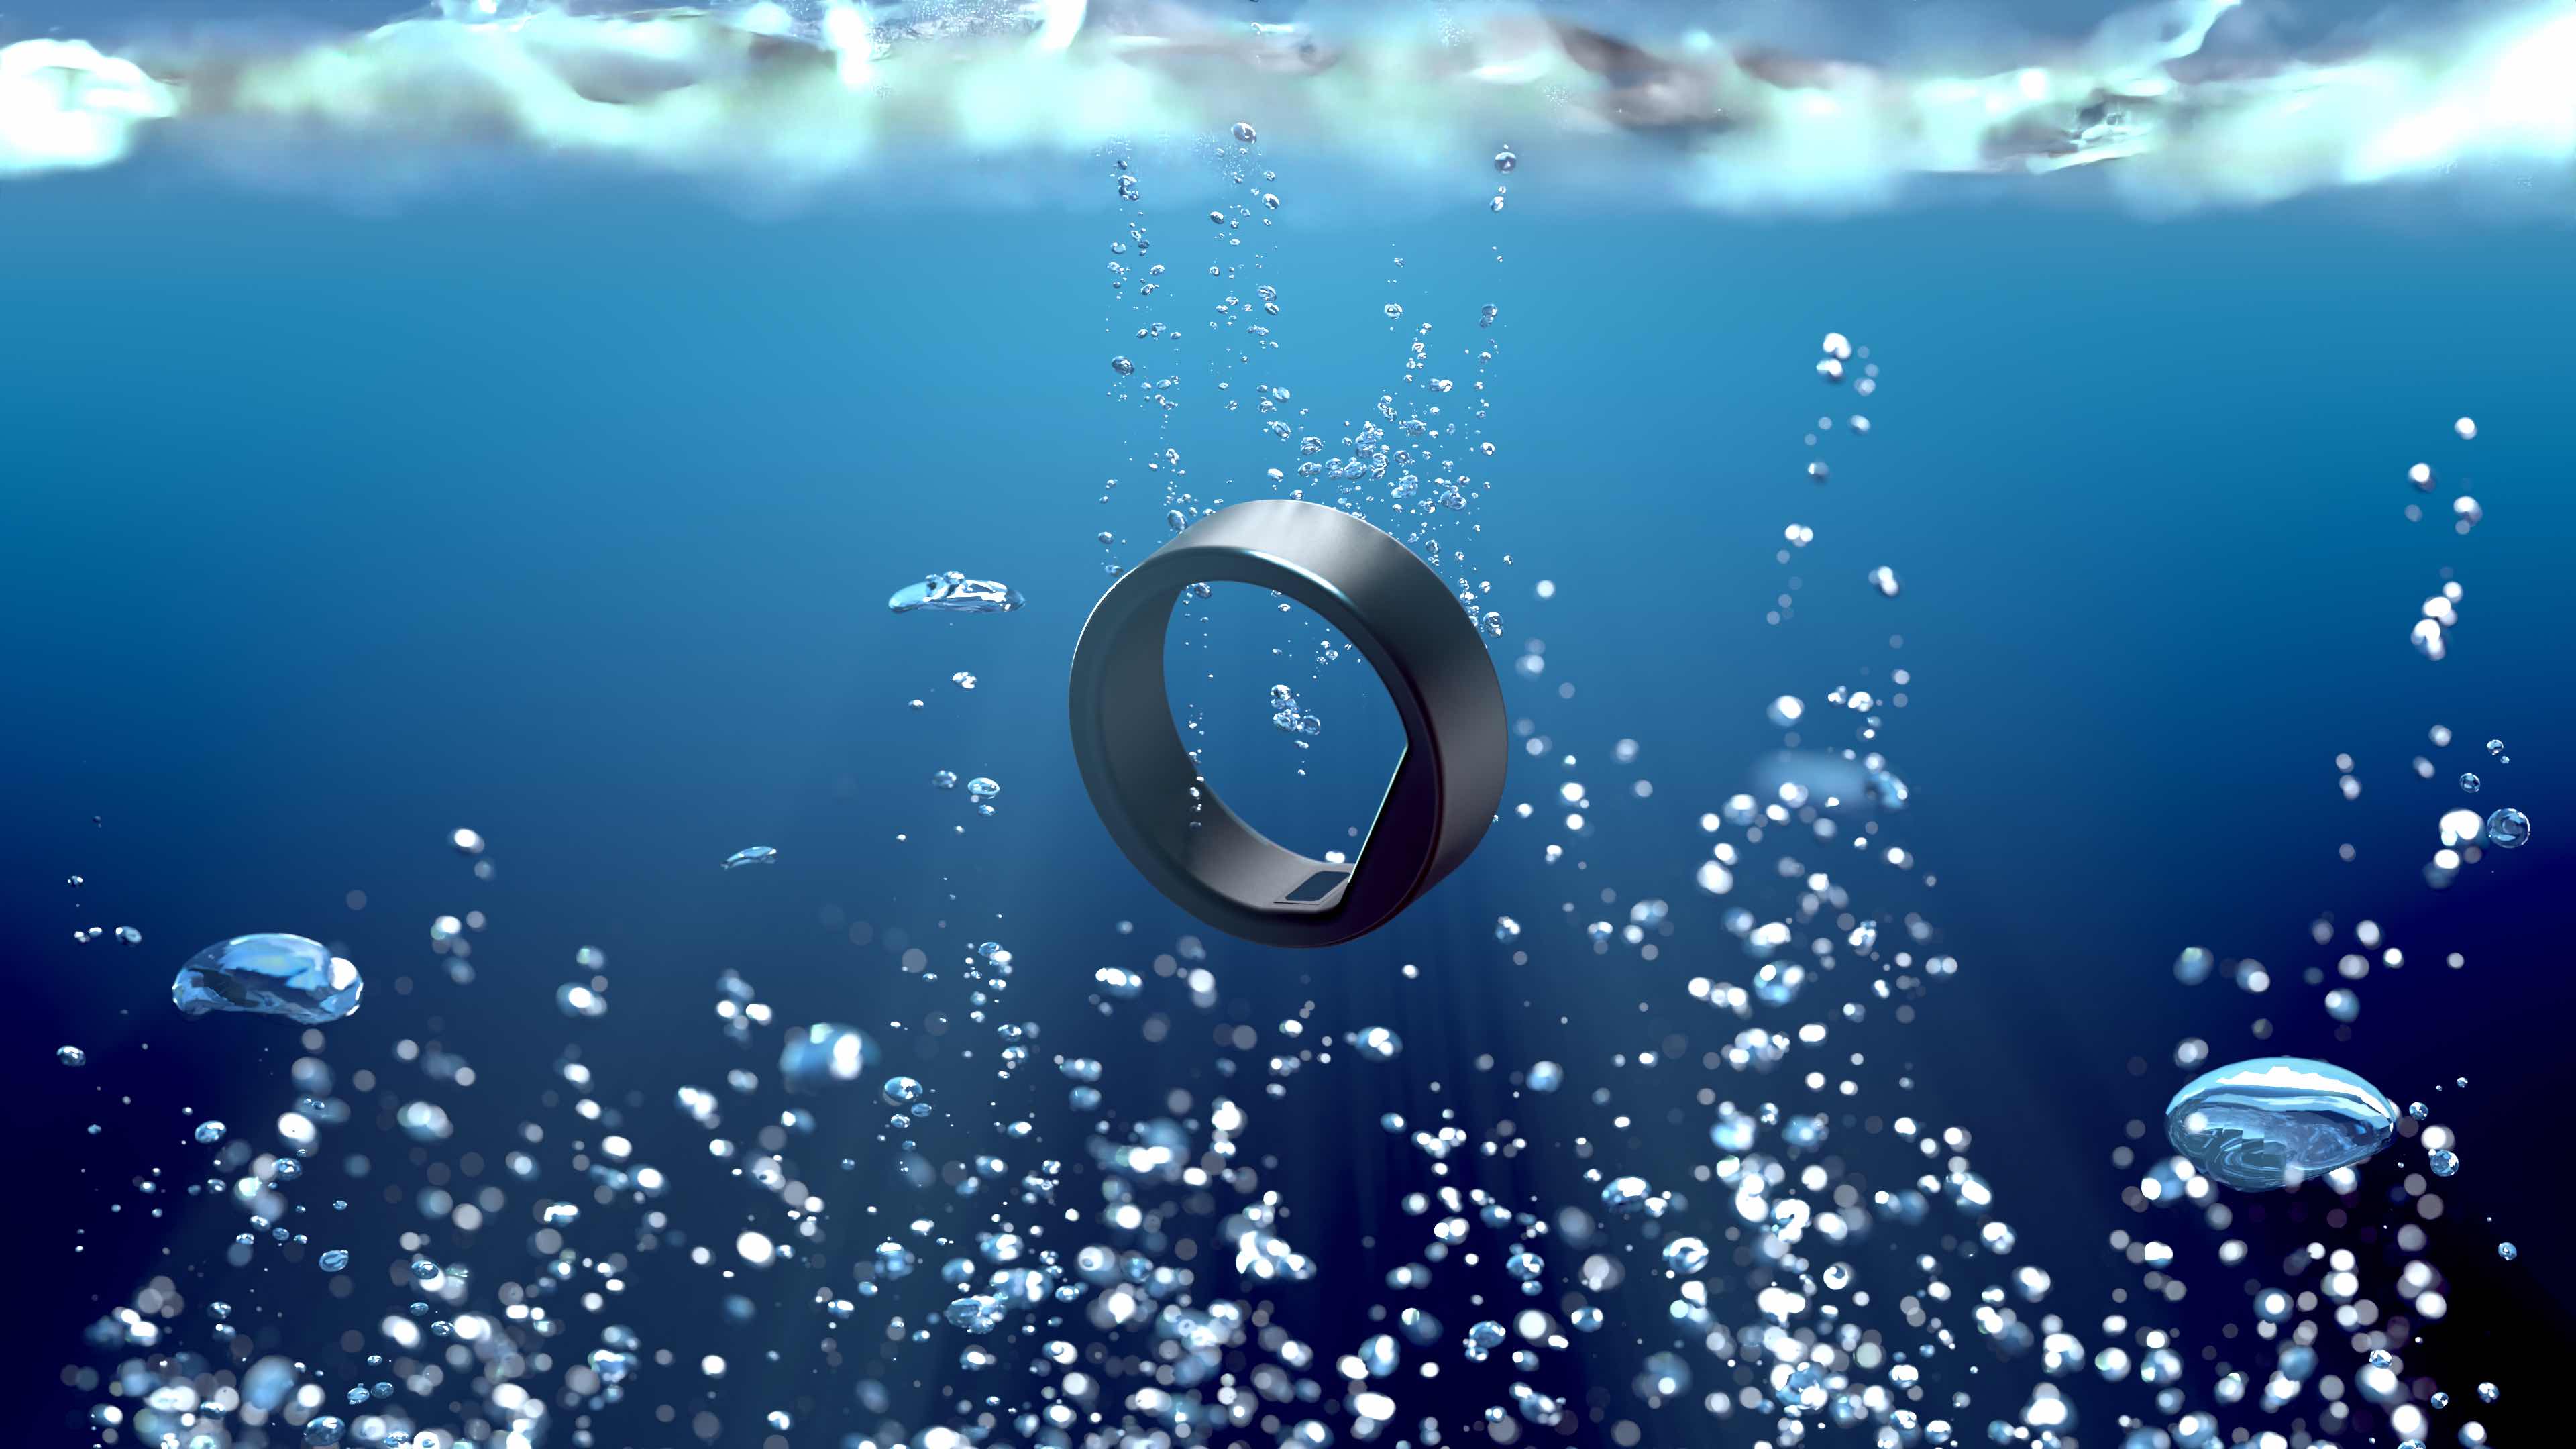 A Circular slim ring depicted under water